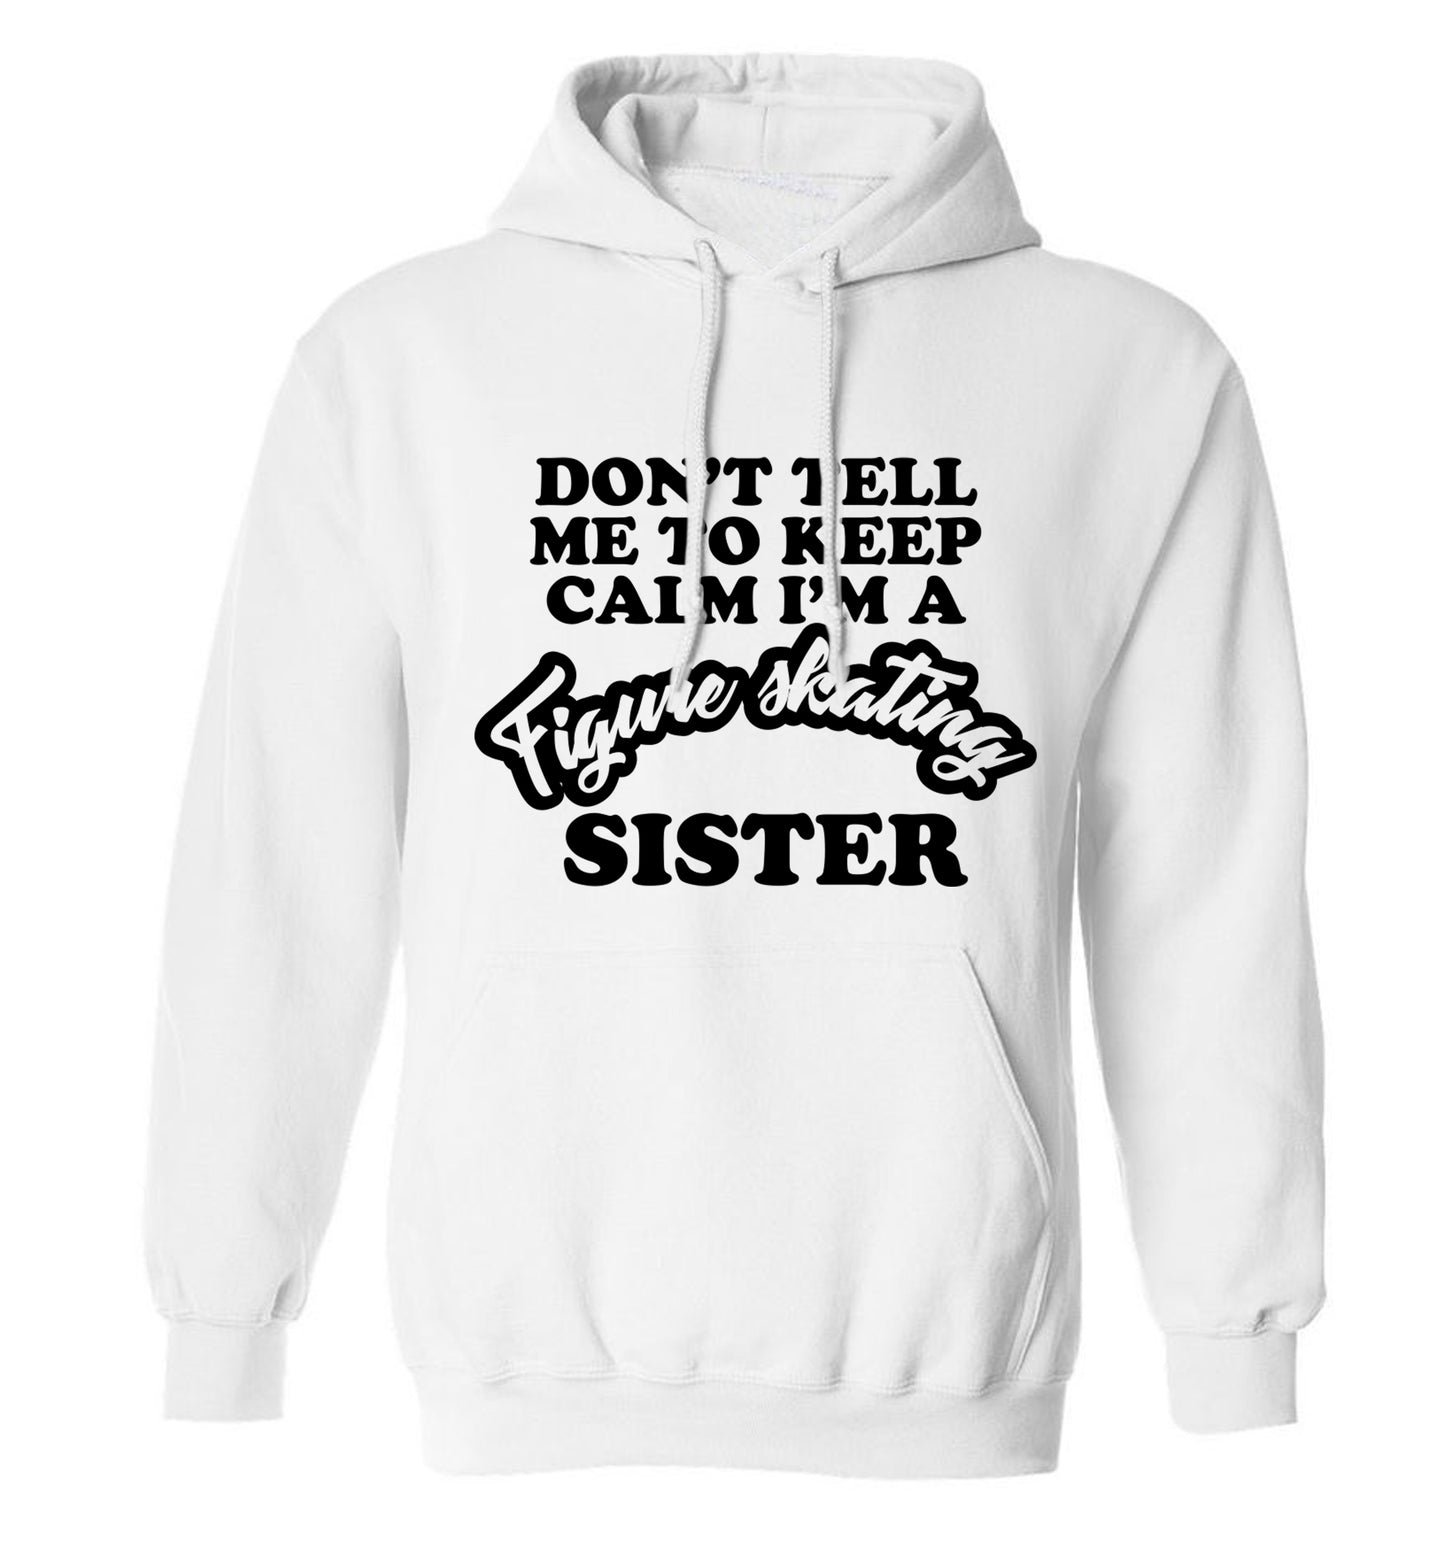 Don't tell me to keep calm I'm a figure skating sister adults unisexwhite hoodie 2XL